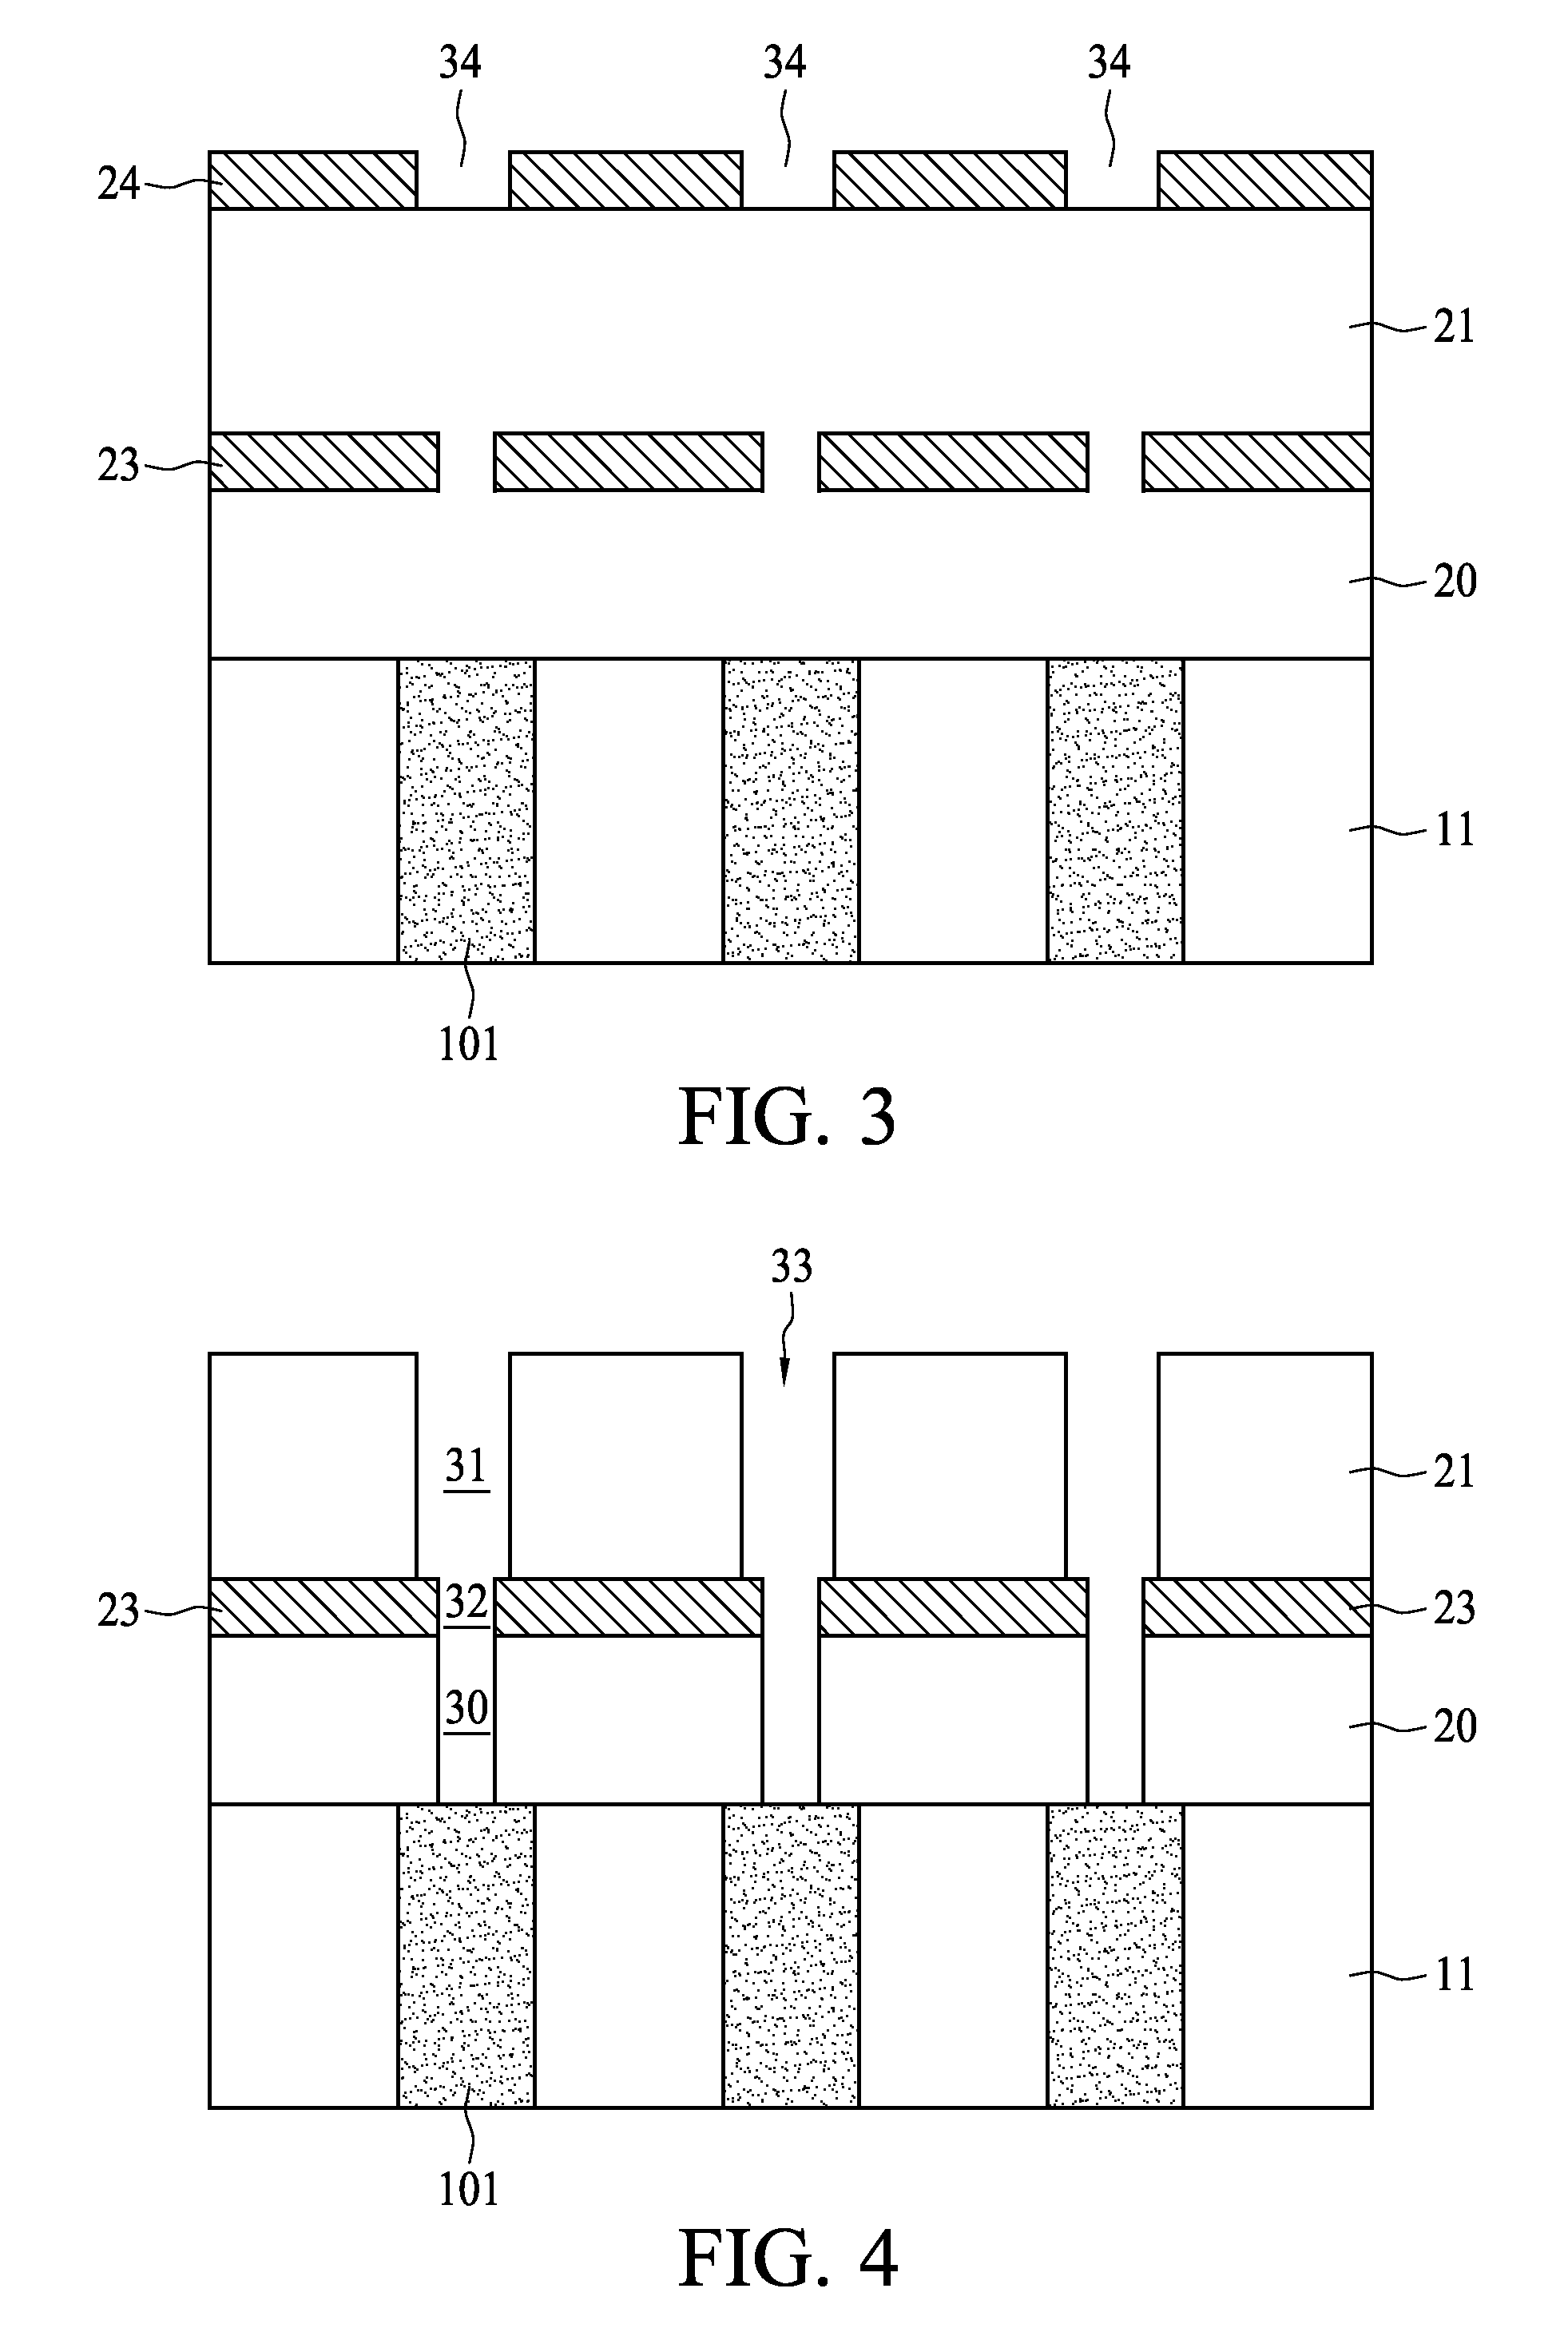 Method of forming an interconnect structure with high process margins